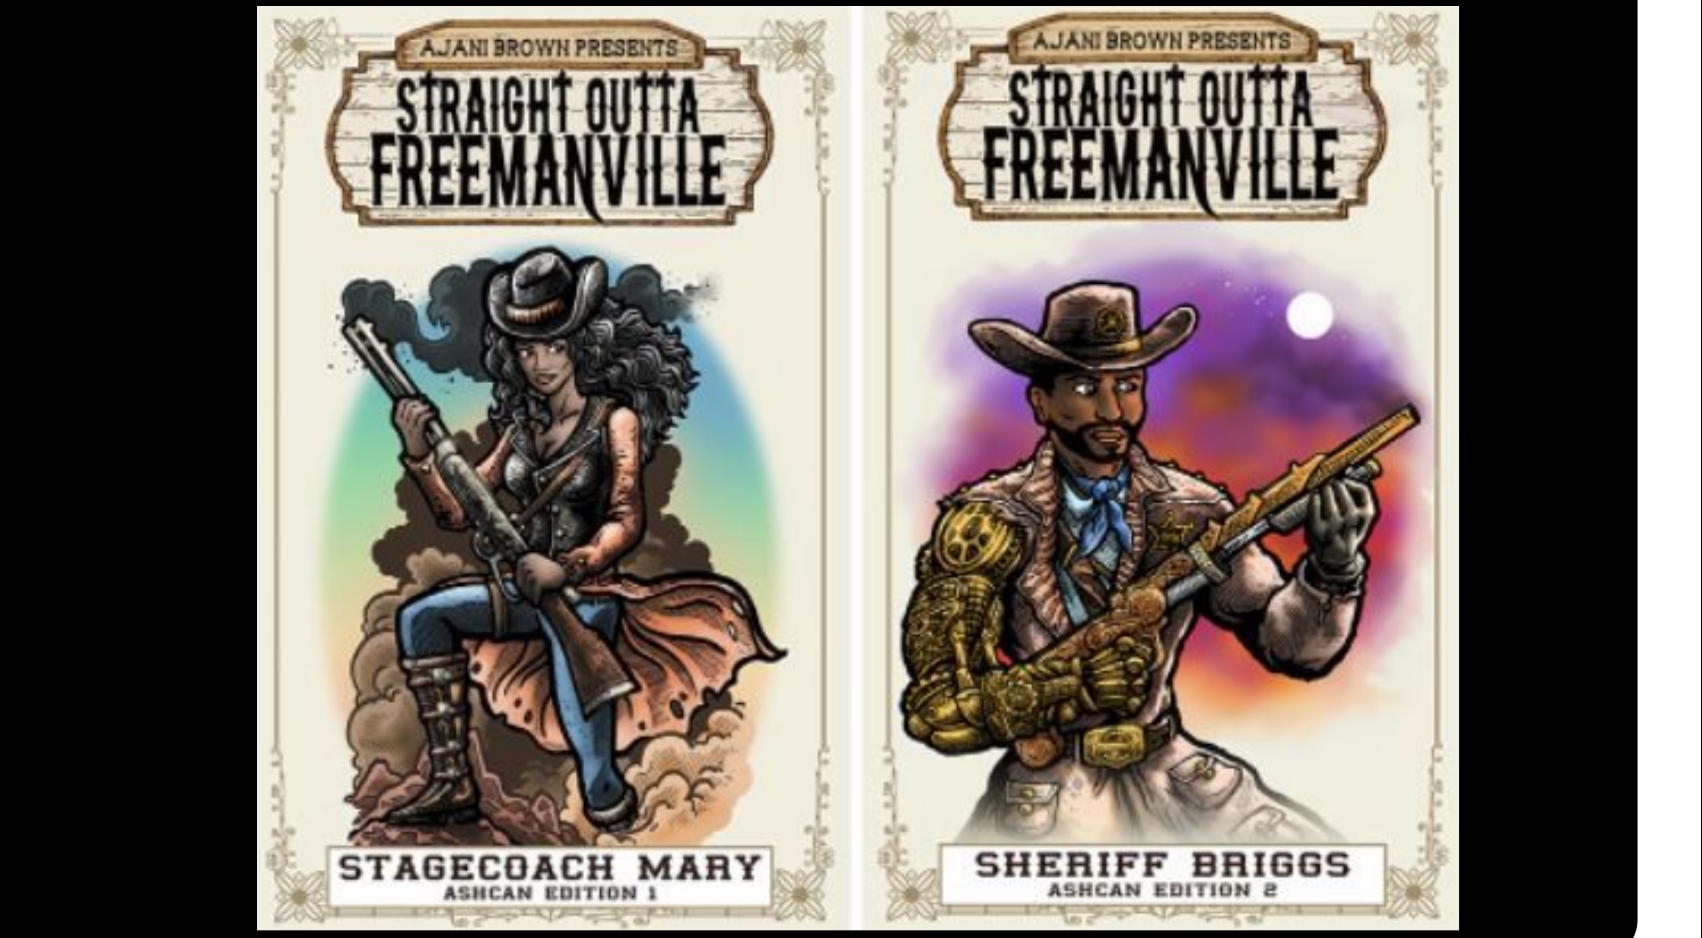 Covers of the award-winning comic book Straight Outta Freemanville, a fantasy comic featuring historical figure Stagecoach Mary, written by SDSU lecturer Ajani Brown.